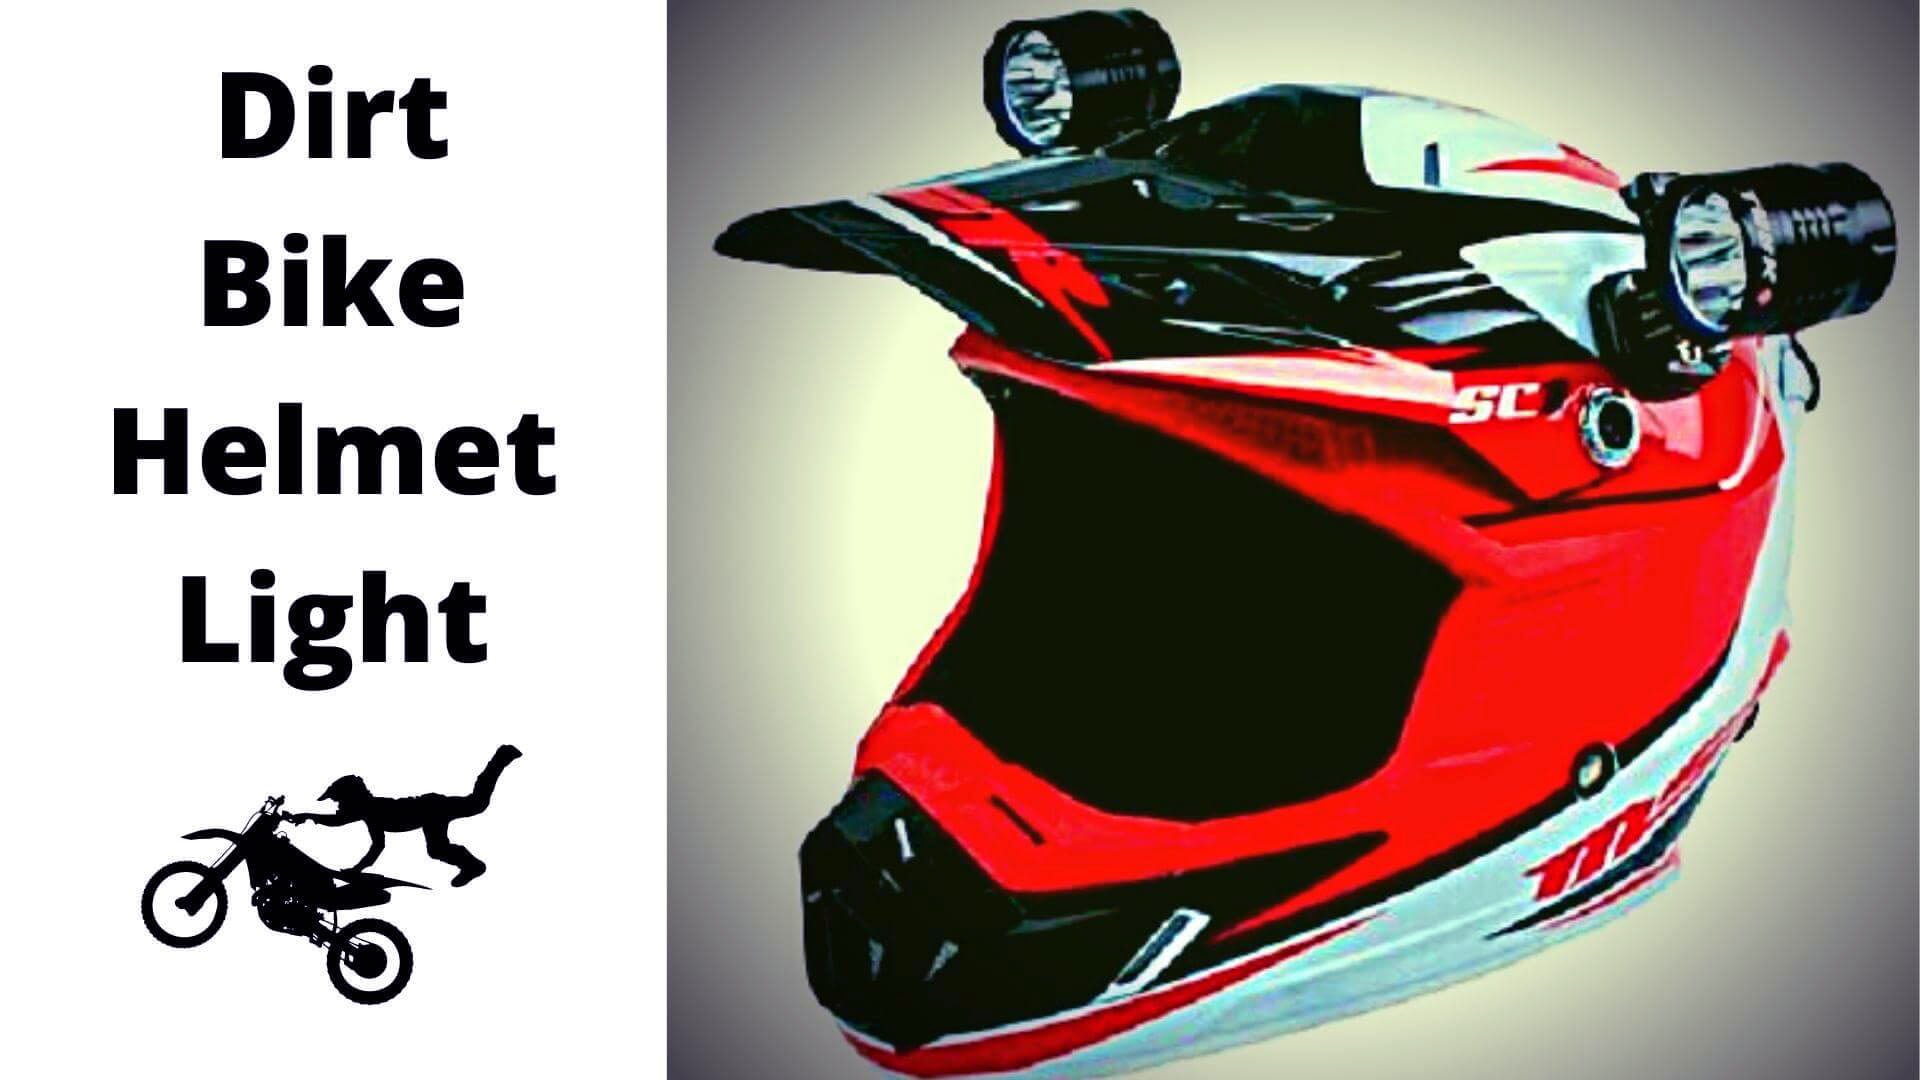 How To Choose The Right Dirt Bike Helmet Light For Your Riding Style